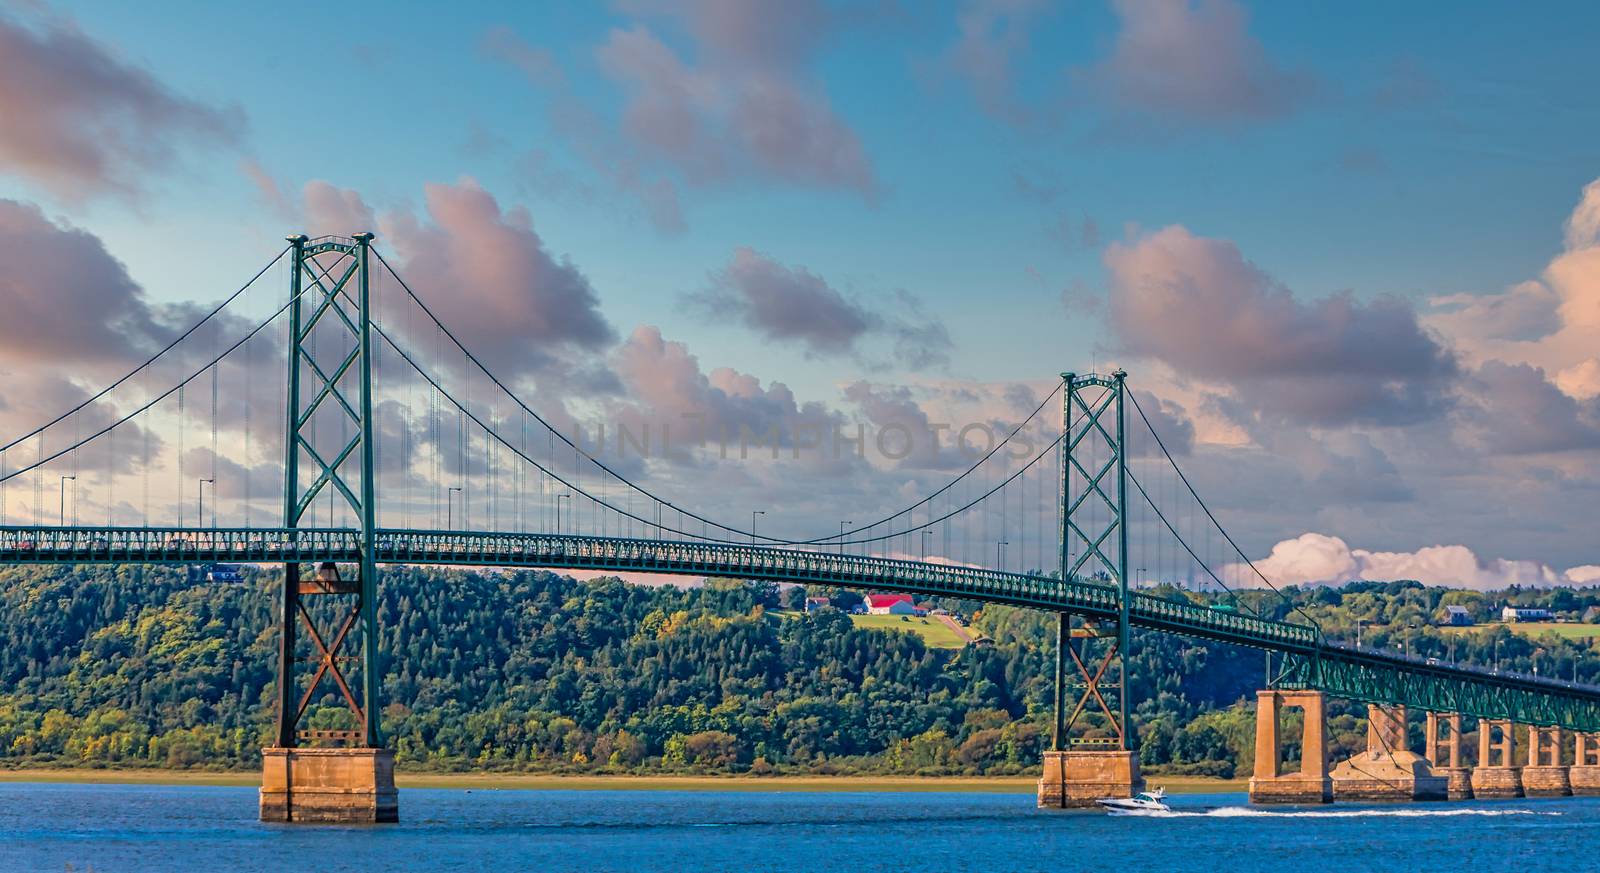 The Orleans Island Bridge Over the Saint Lawrence River near Quebec City, Quebec, Canada